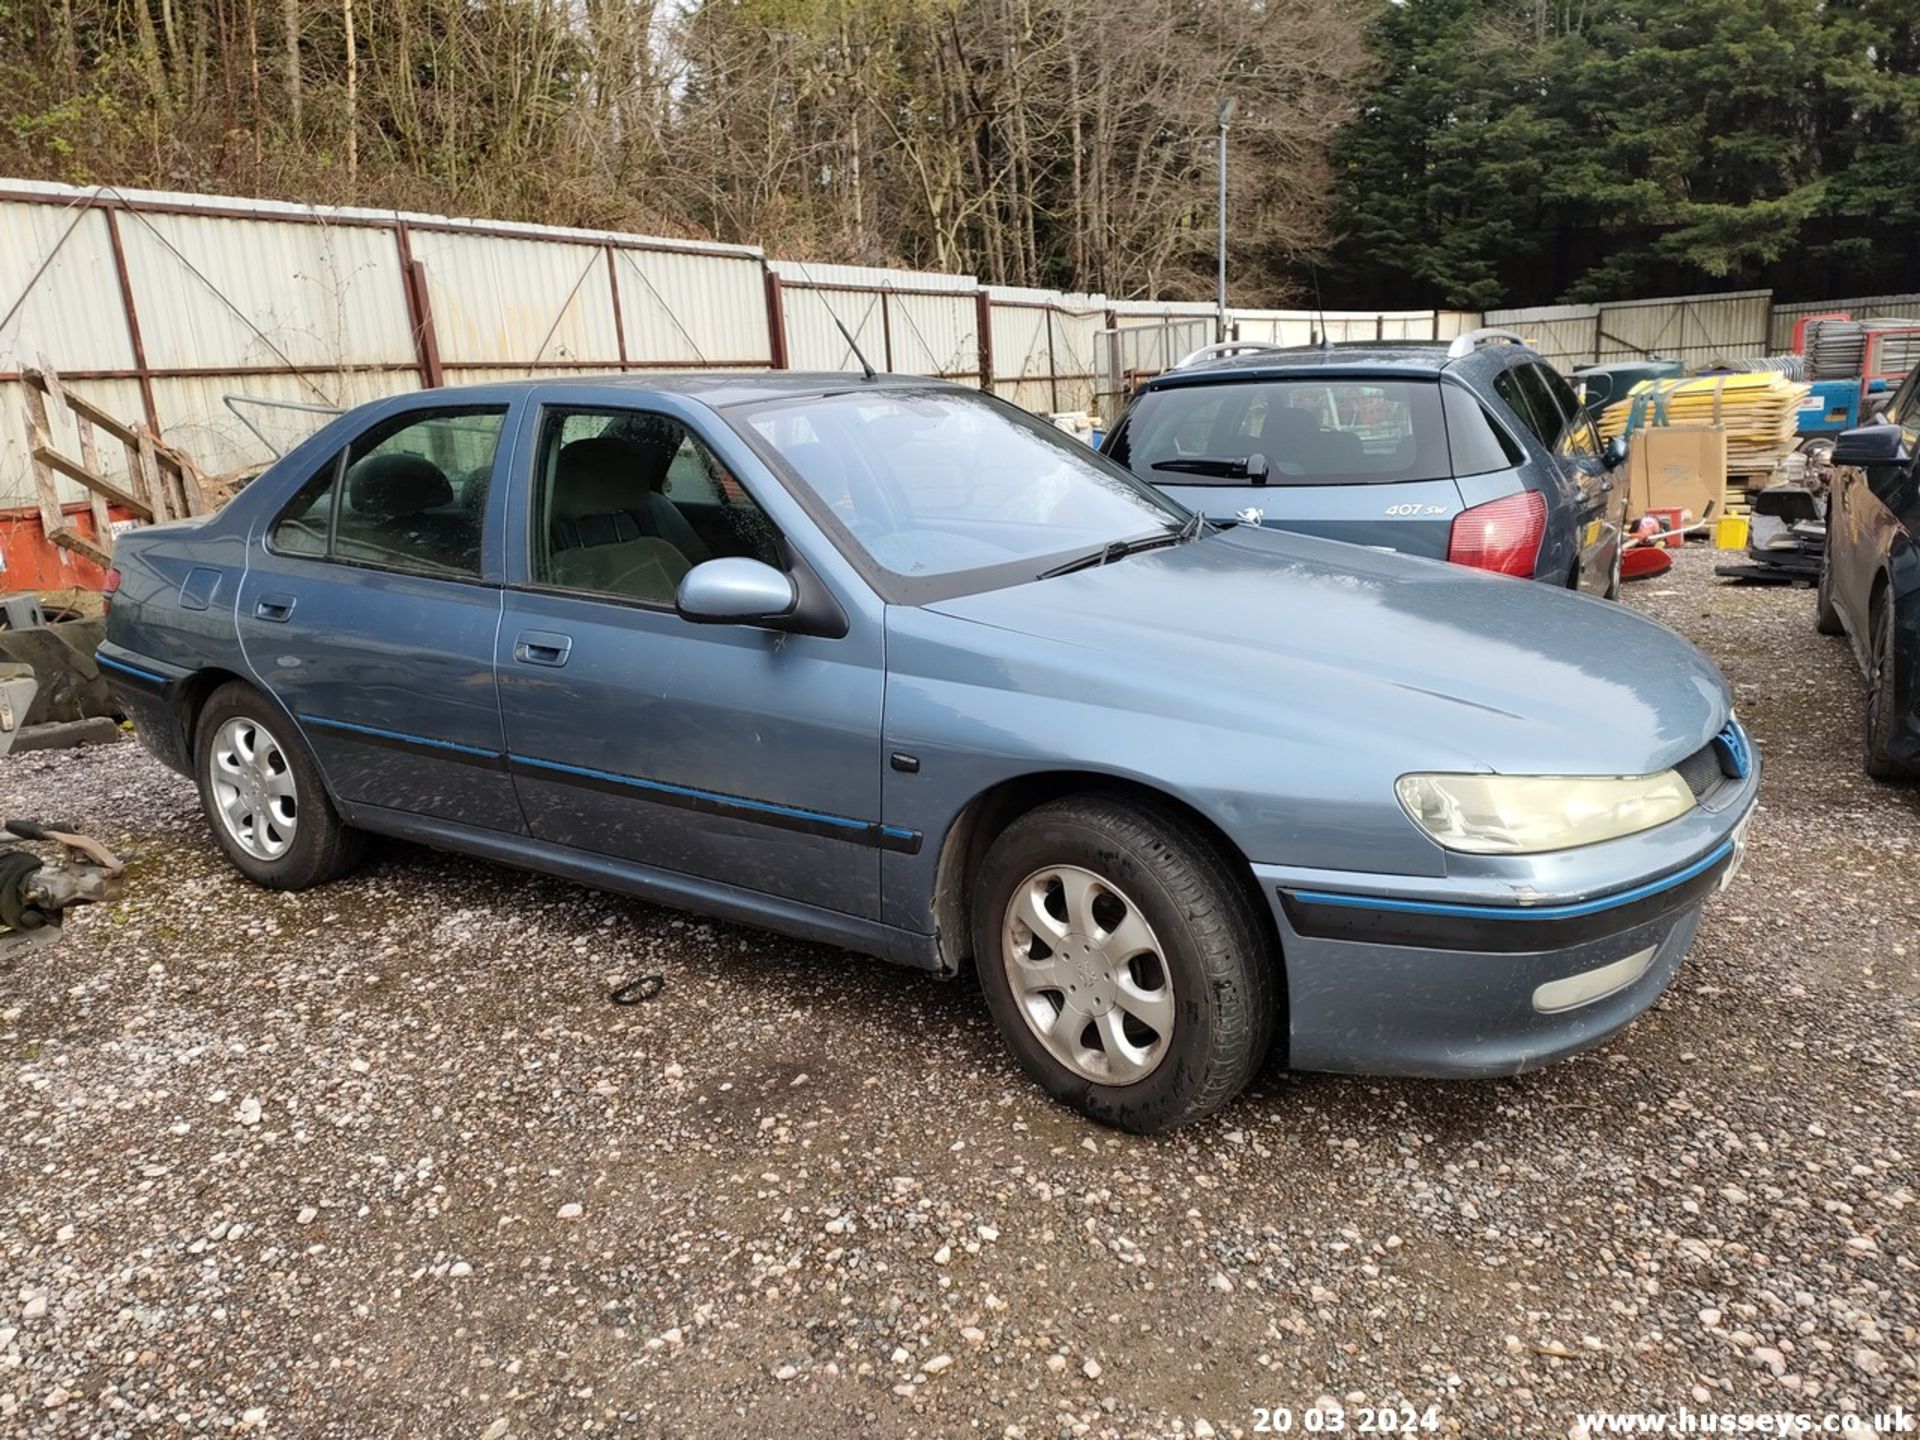 02/51 PEUGEOT 406 GTX HDI AUTO - 1997cc 4dr Saloon (Blue) - Image 2 of 59